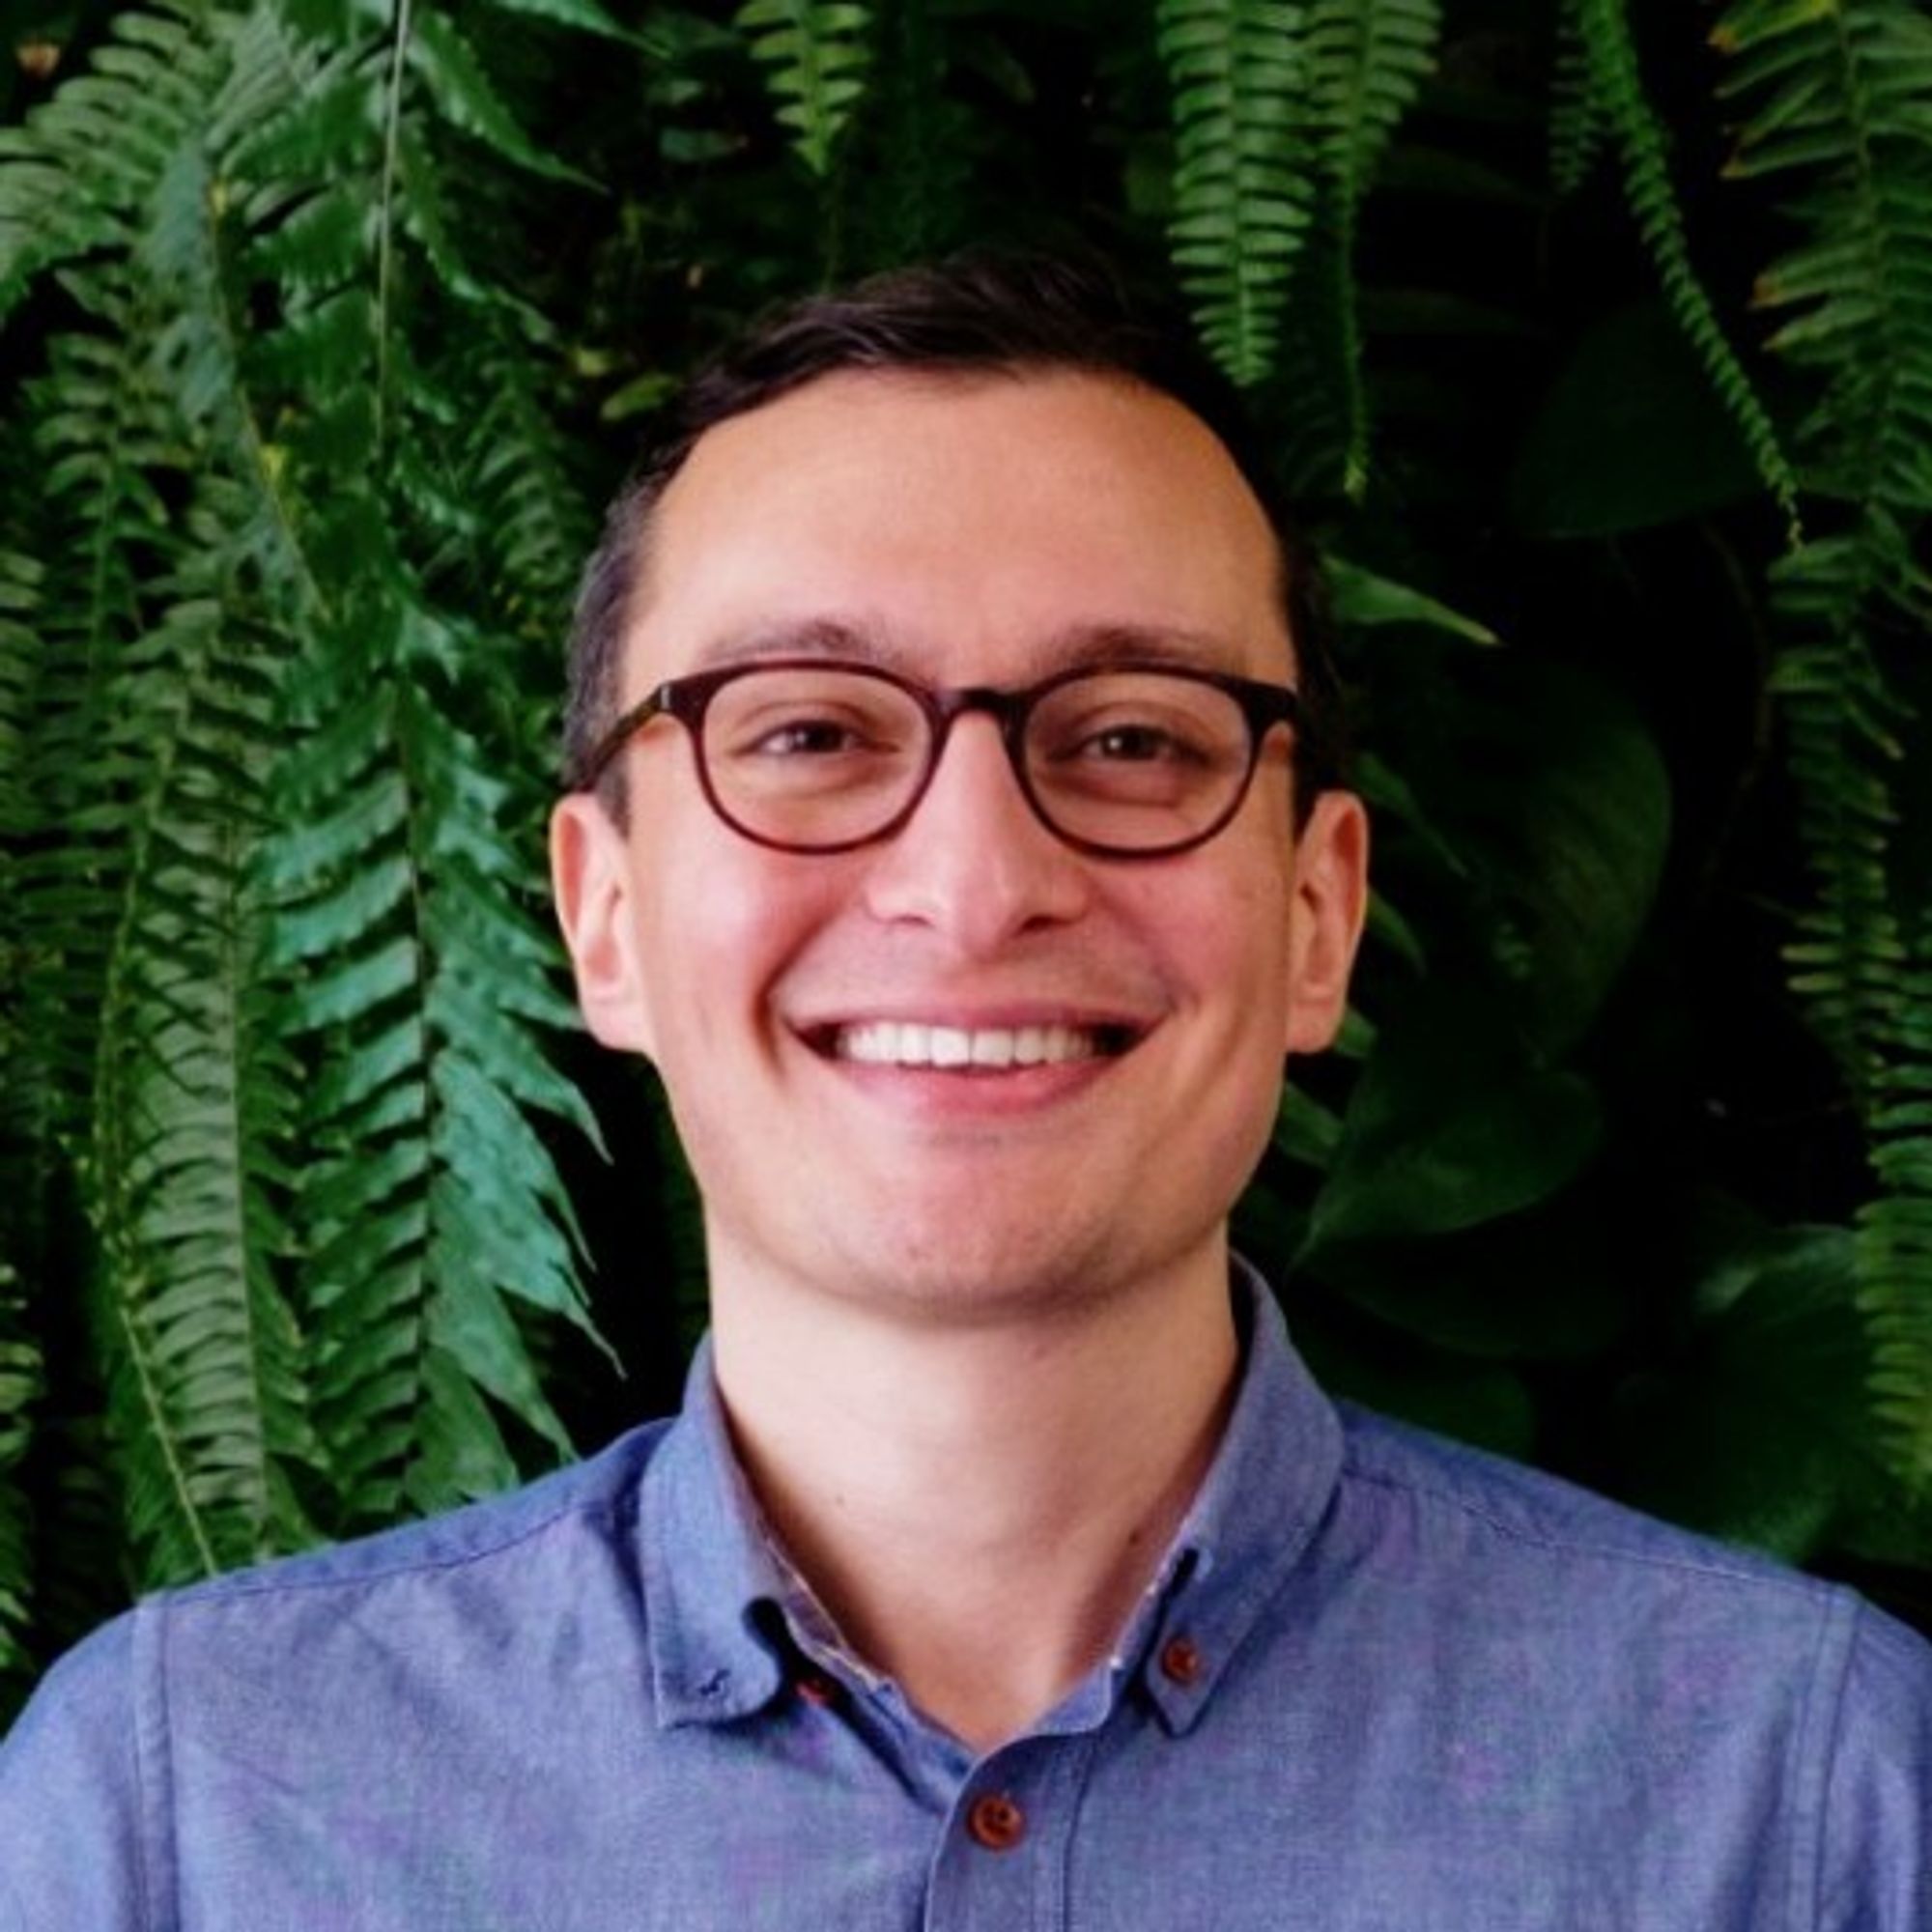 Gabe Novais
Product Lead
Prior Product Lead @Front and Airbnb • Loves wildlife travel, Seattle sports, and New Year's ski trips